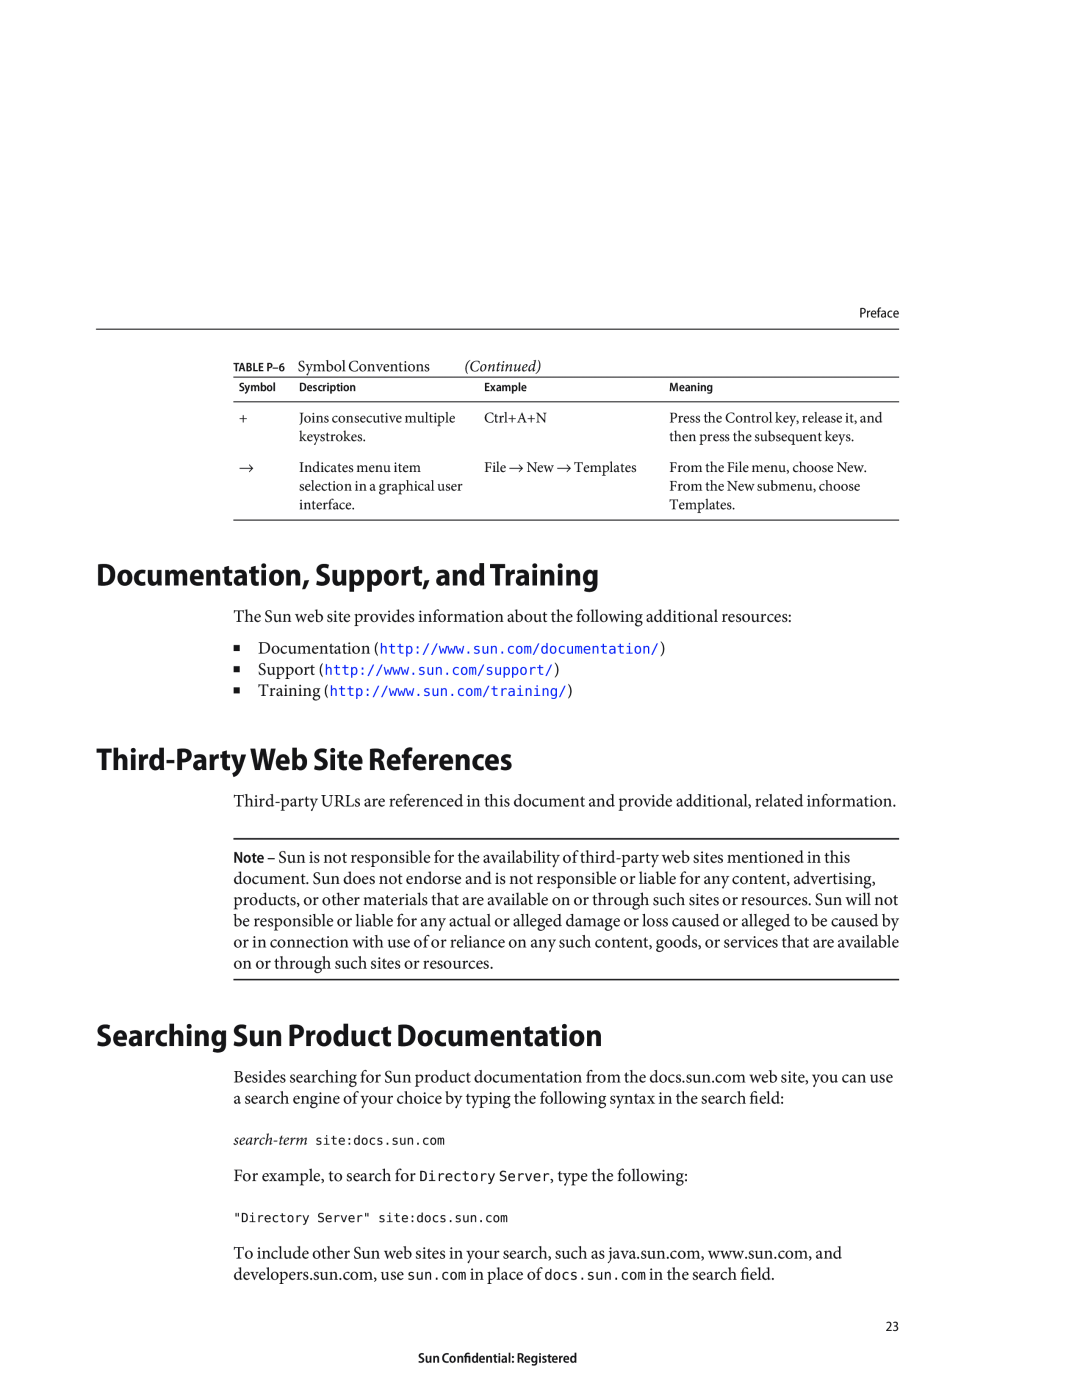 Sun Microsystems 8190994 manual Documentation, Support, and Training, Third-Party Web Site References 